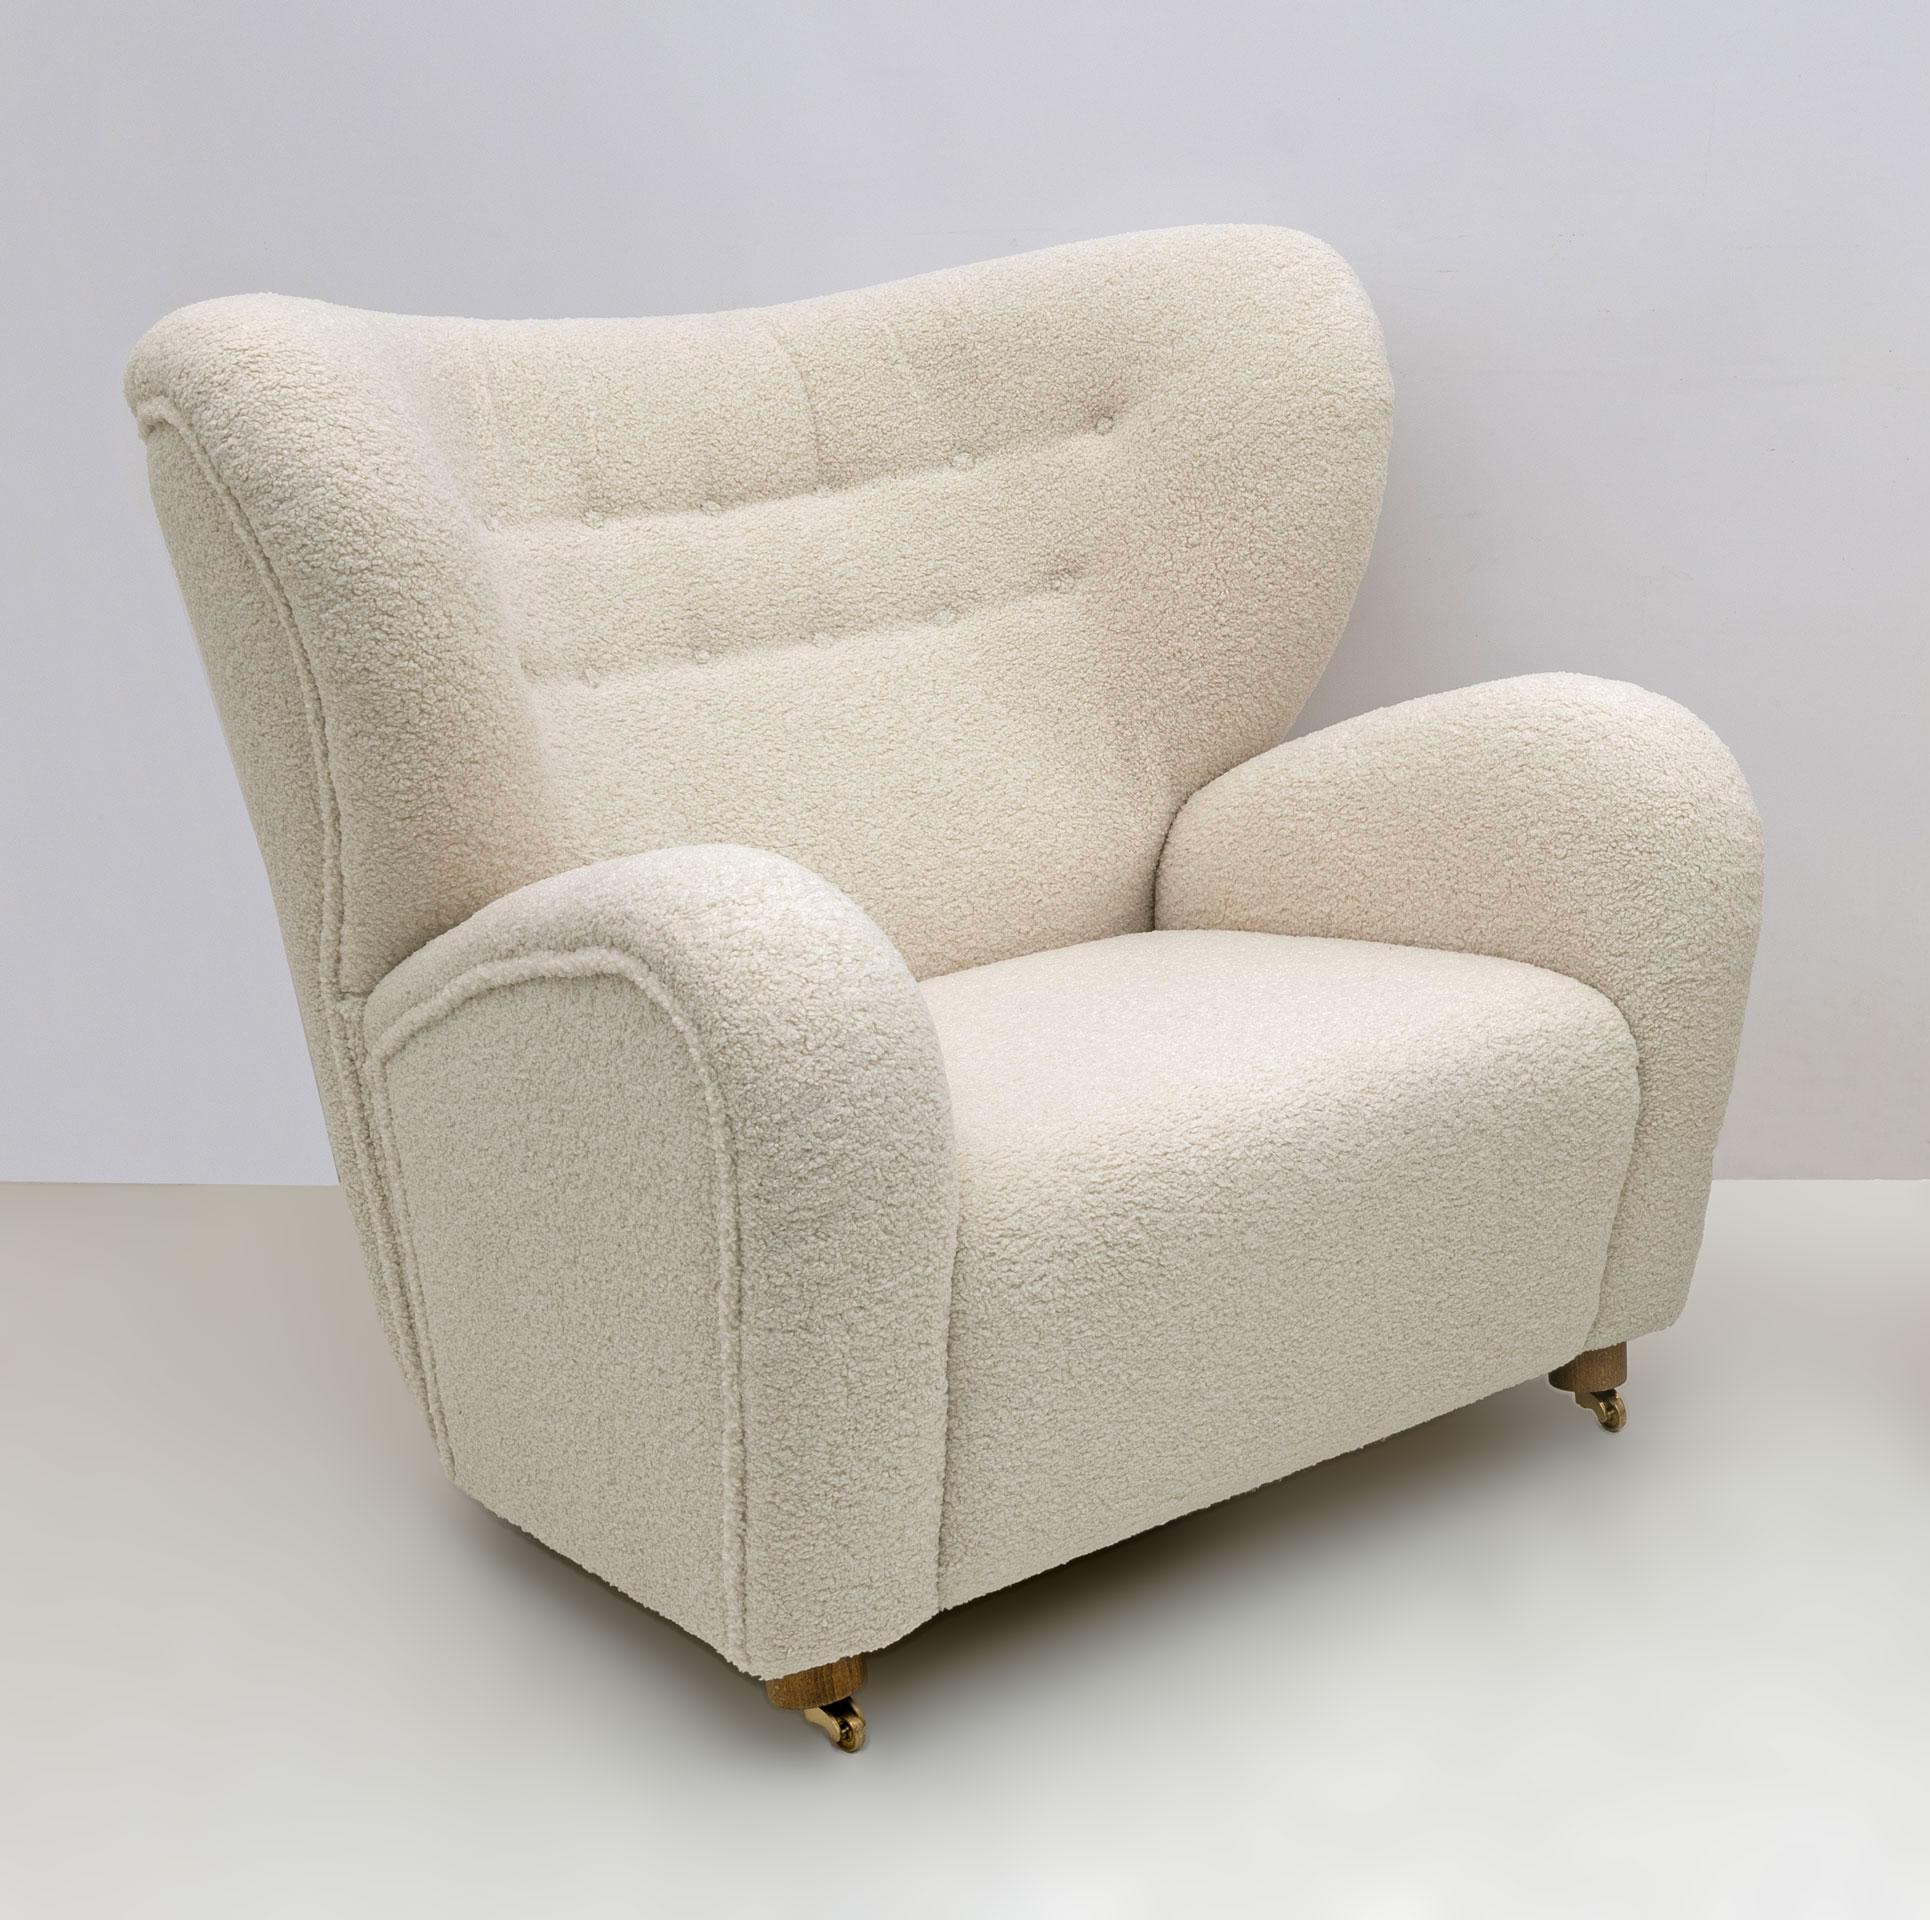 Sahco Zero The Tired Man beige lounge chair by Lassen. Flemming Lassen designed The Stanco upholstered armchair in 1935 for the Copenhagen cabinetmakers' guild competition. It features organic bear shapes and caused a sensation then as now with its